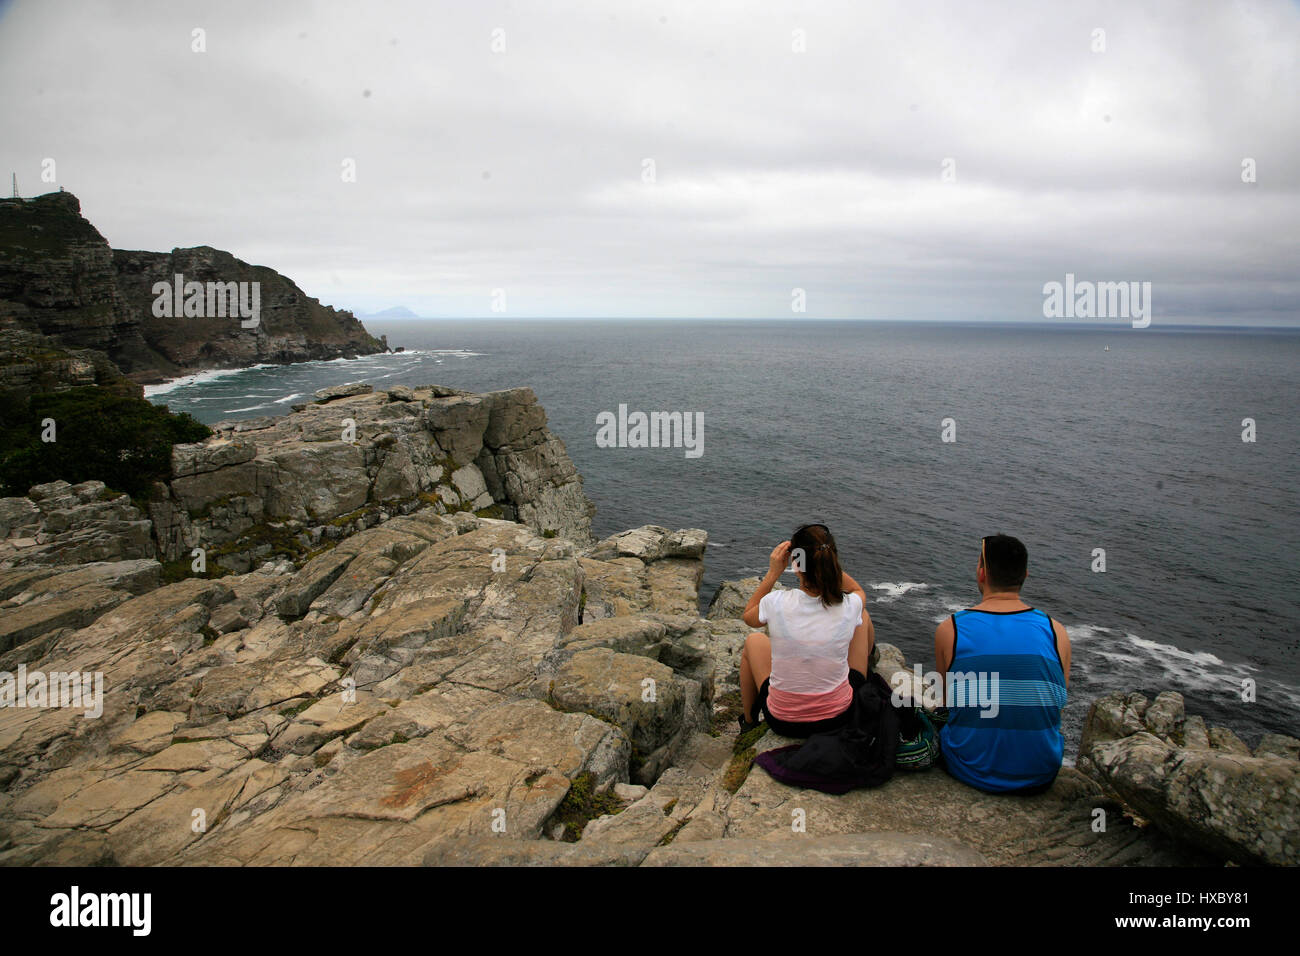 Tourists look at the scenery at the Cape of Good Hope, on the Atlantic coast of the Cape Peninsula, South Africa March 8, 2017. © John Voos Stock Photo